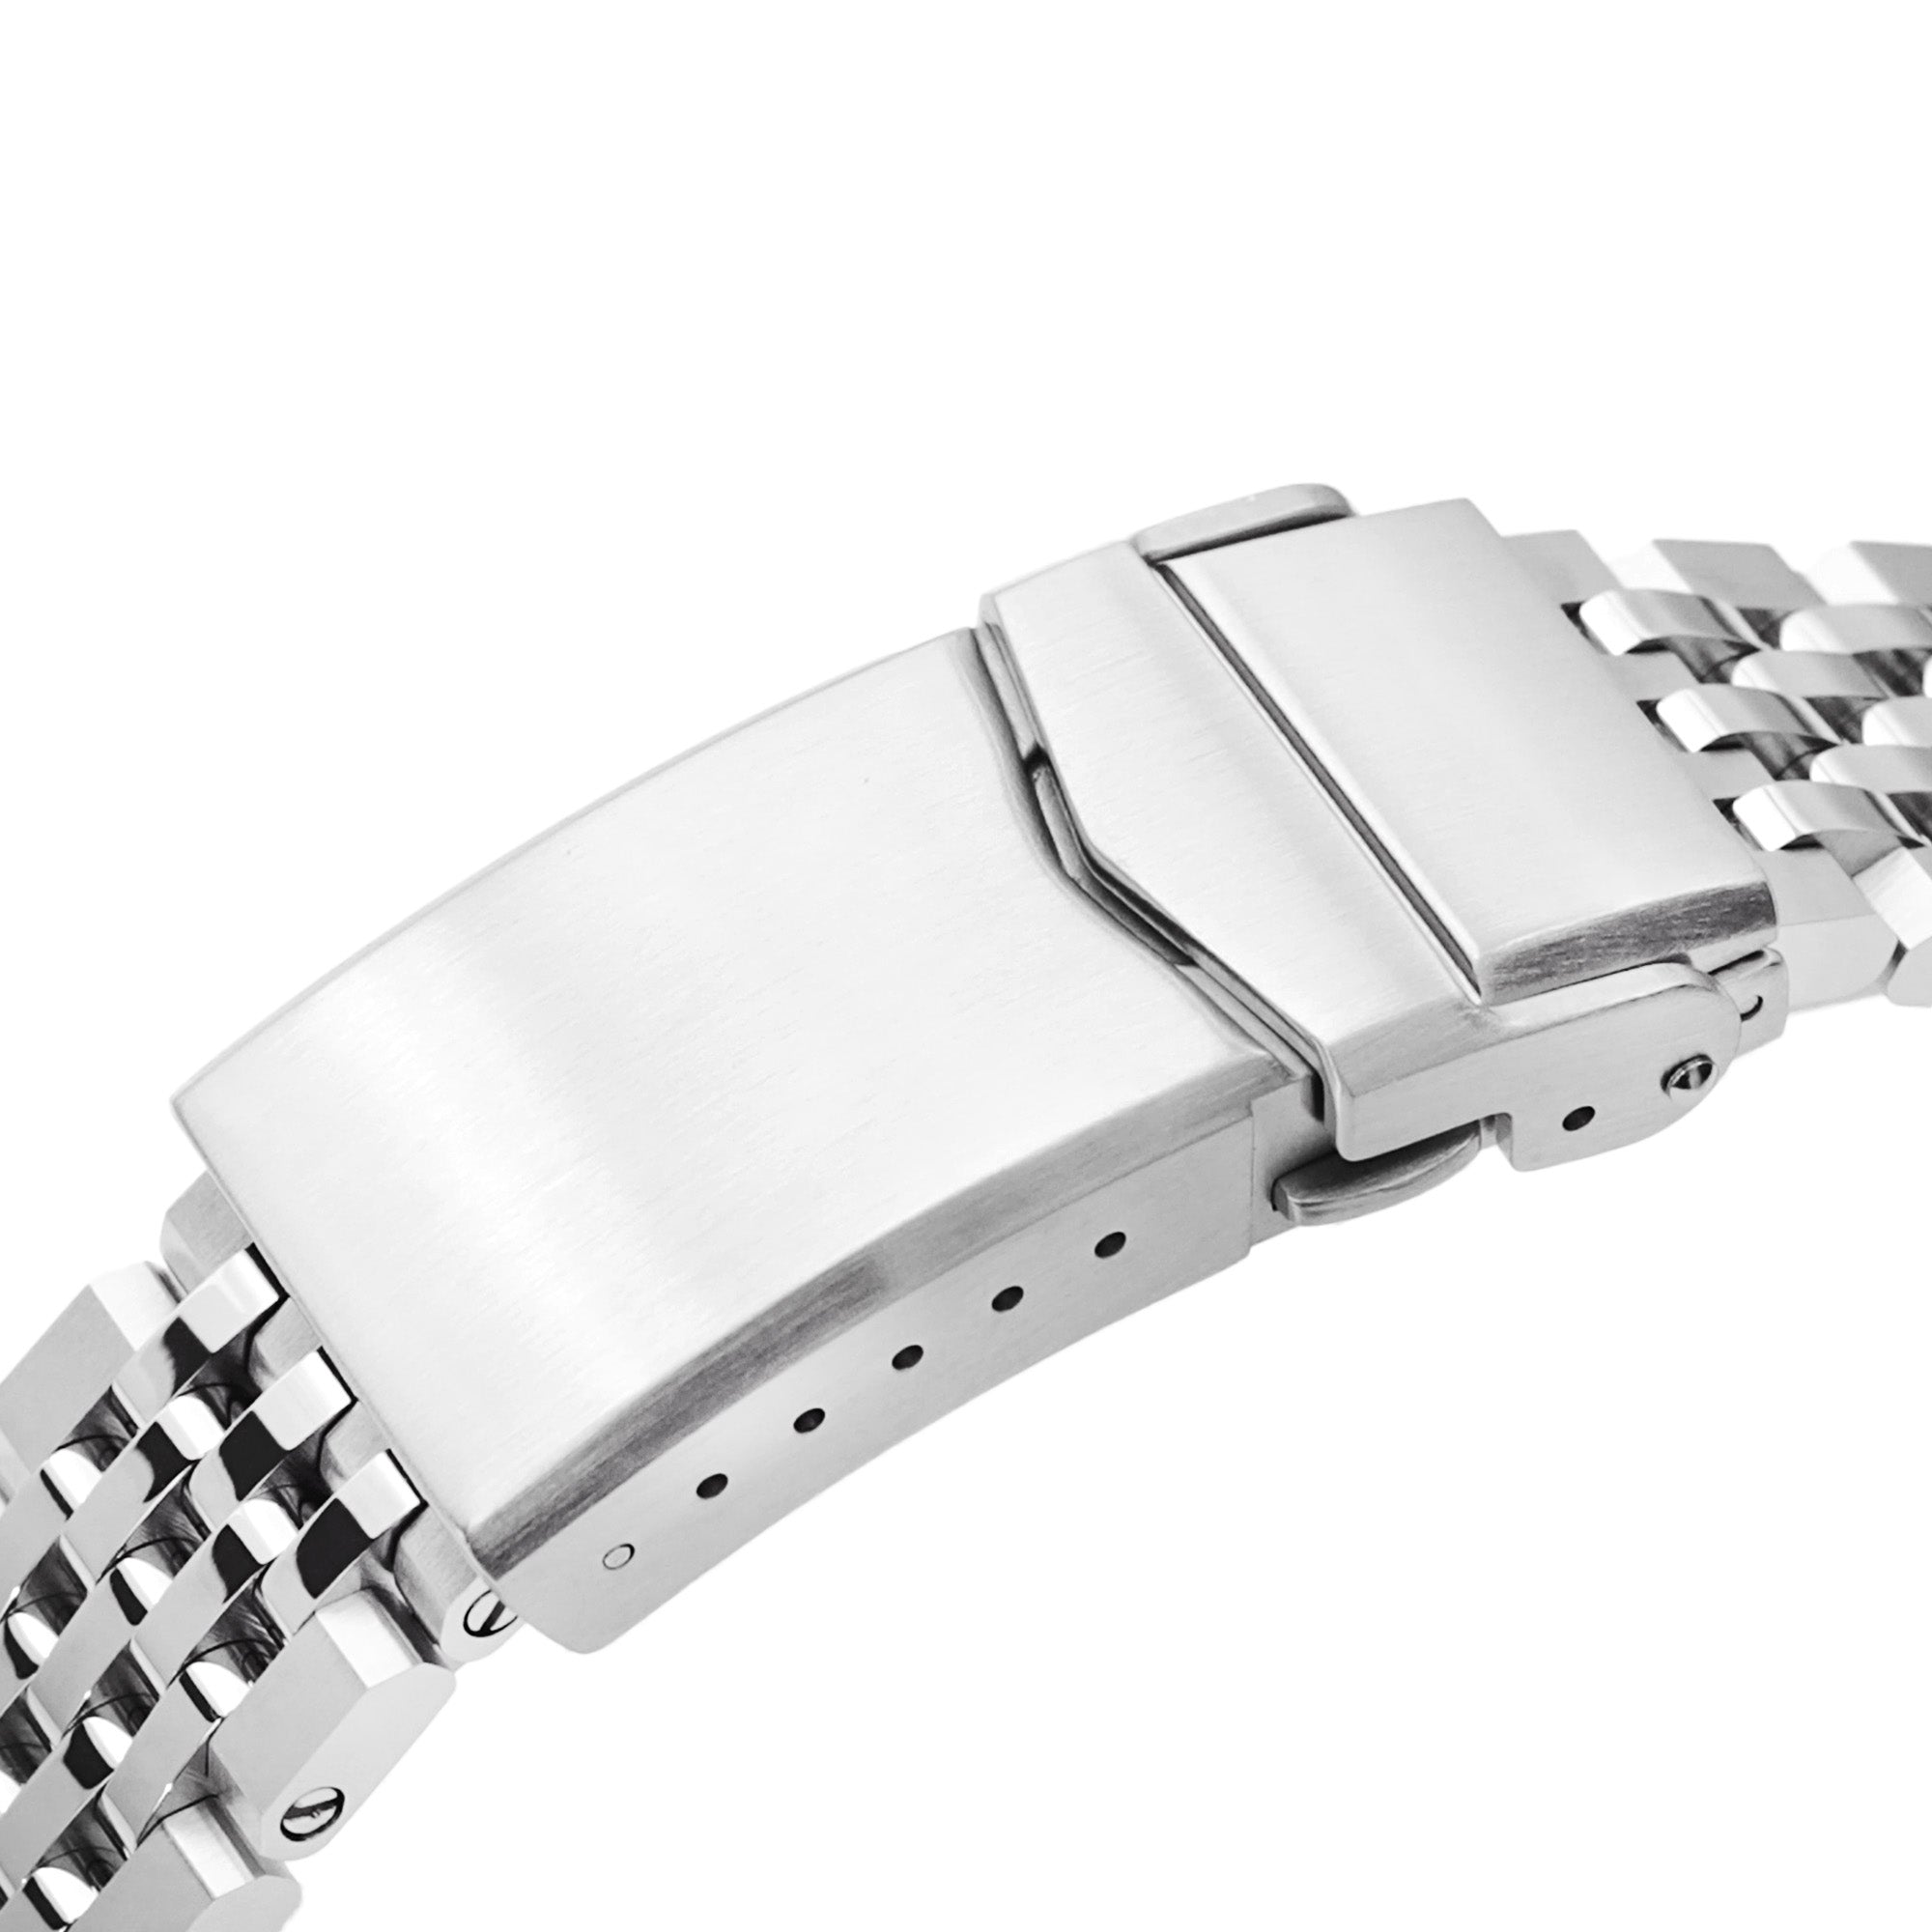 19mm Asteroid Watch Band for Grand Seiko 44GS SBGJ235, 316L Stainless Steel Brushed and Polished V-Clasp Strapcode Watch Bands